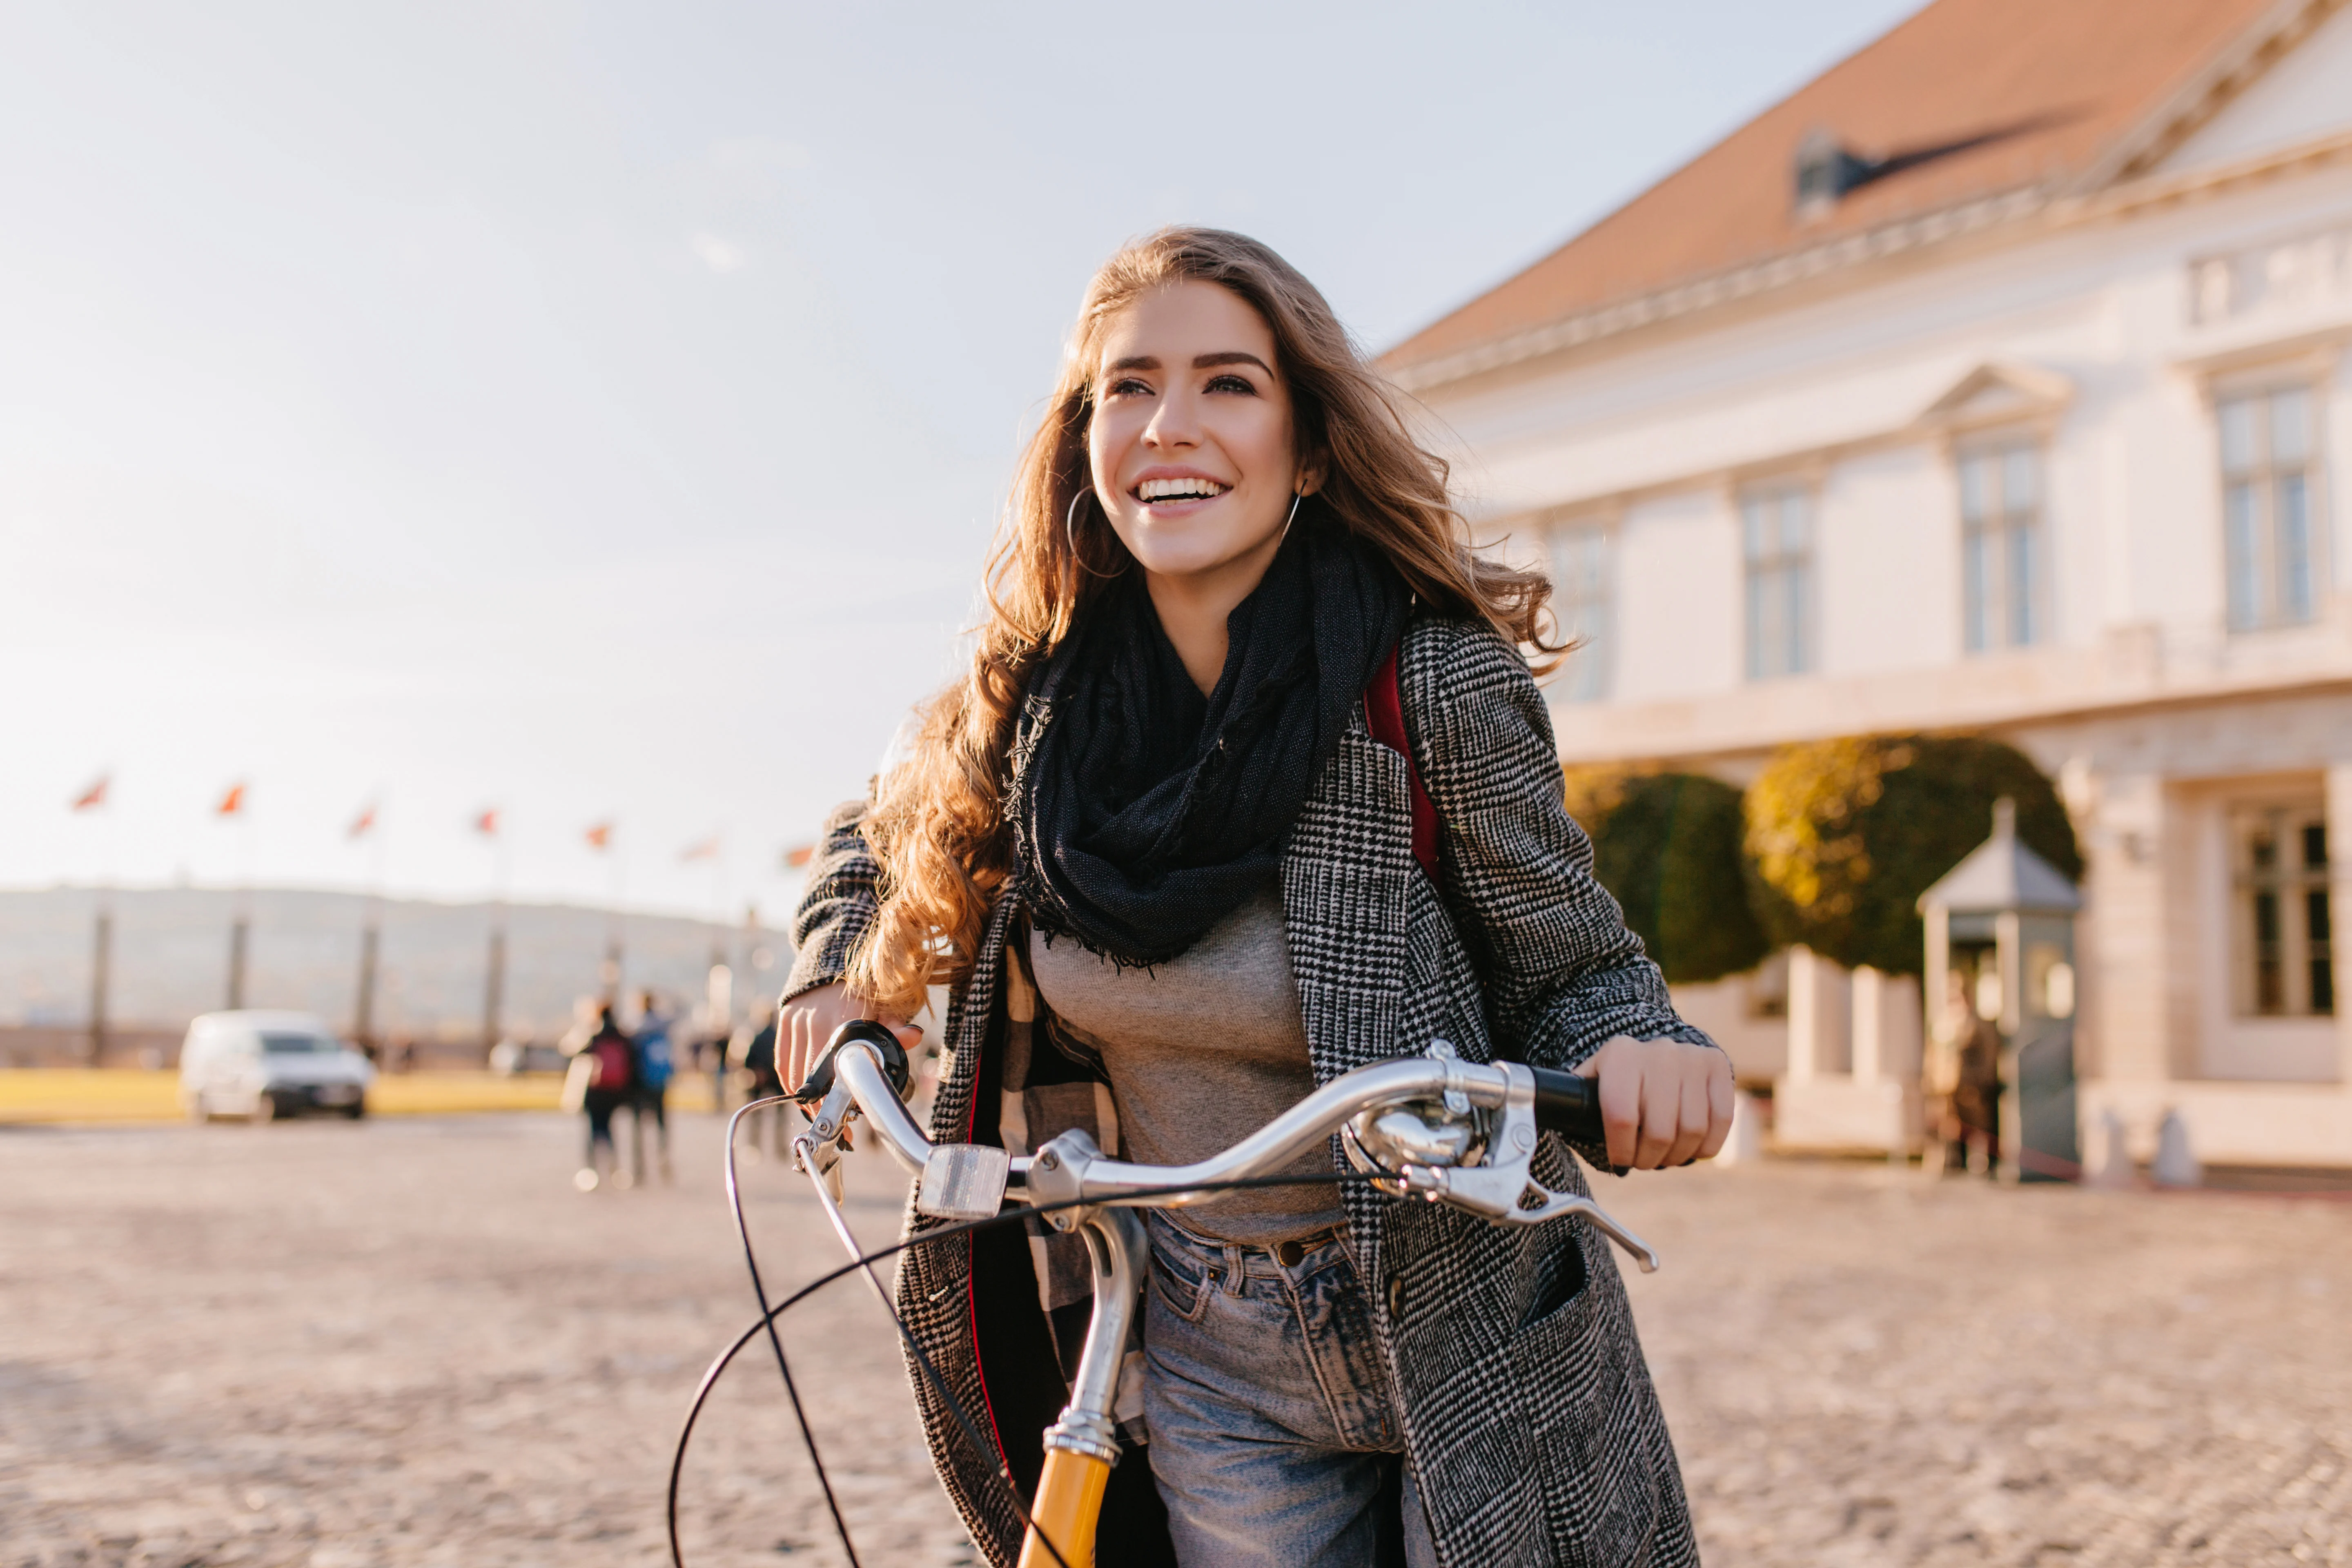 Woman holding her bike and smiling while looking at the distance